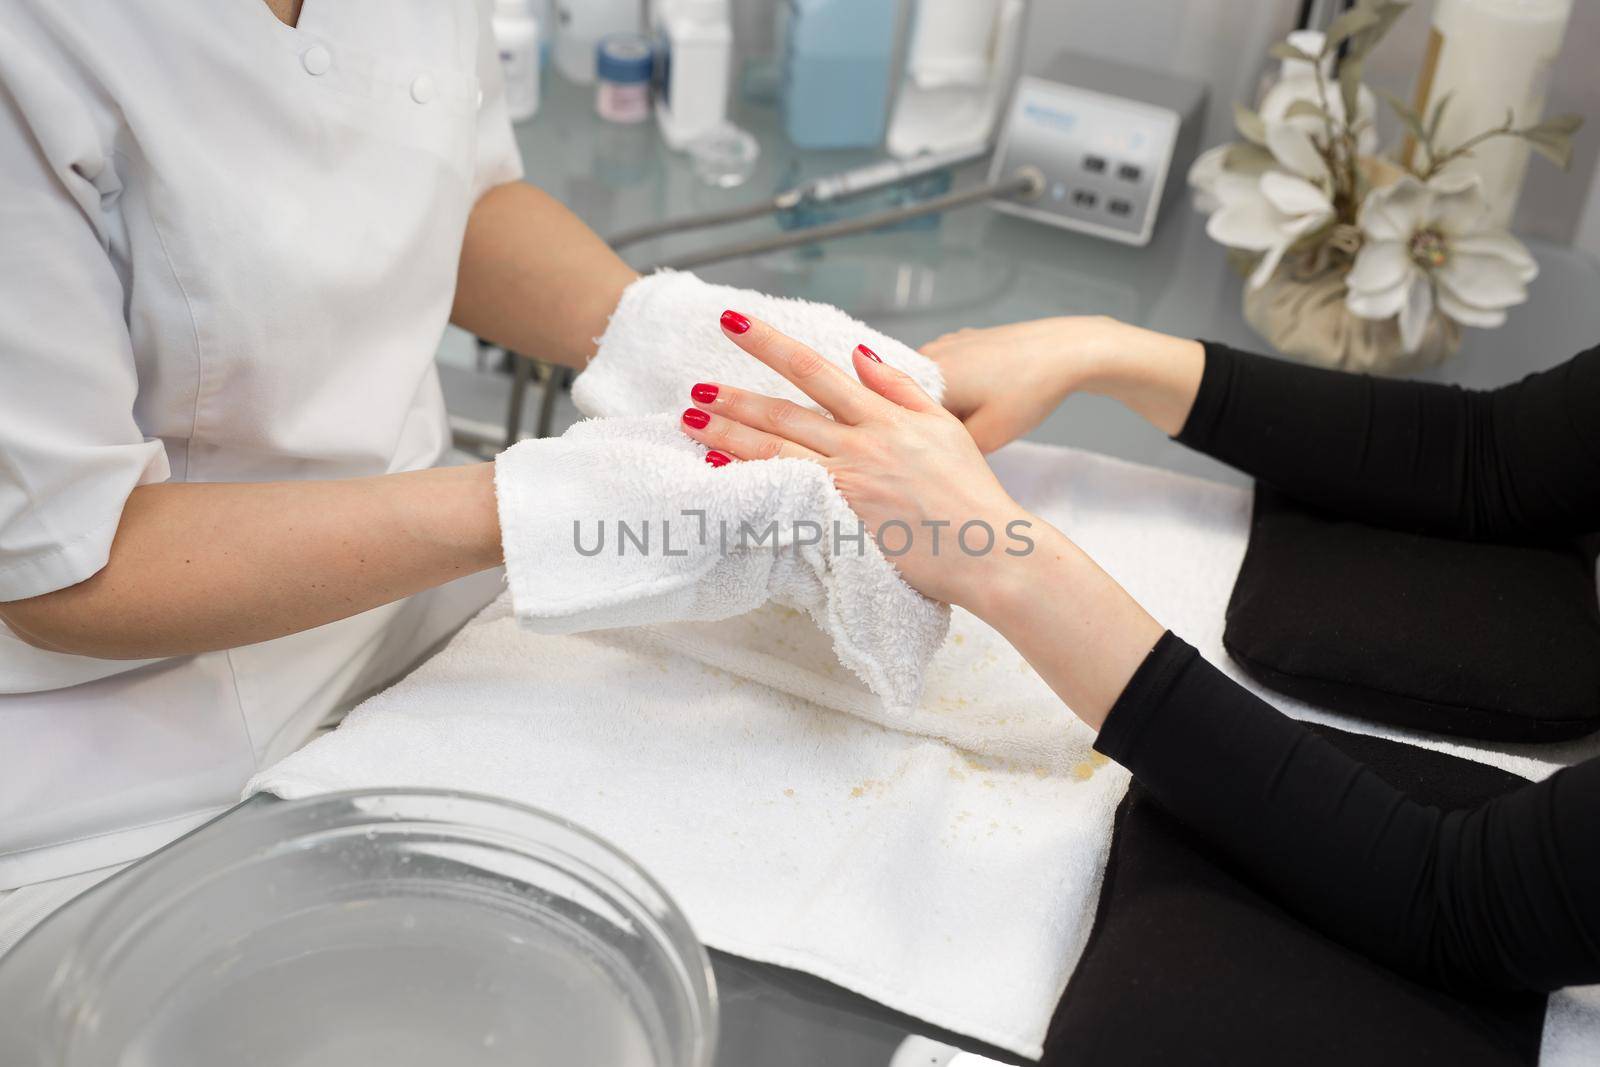 Beautician makes spa treatments for the care hands of a young girl in the beauty parlor. A manicurist wipes her hands with a wet towel to a client after scrub and massage